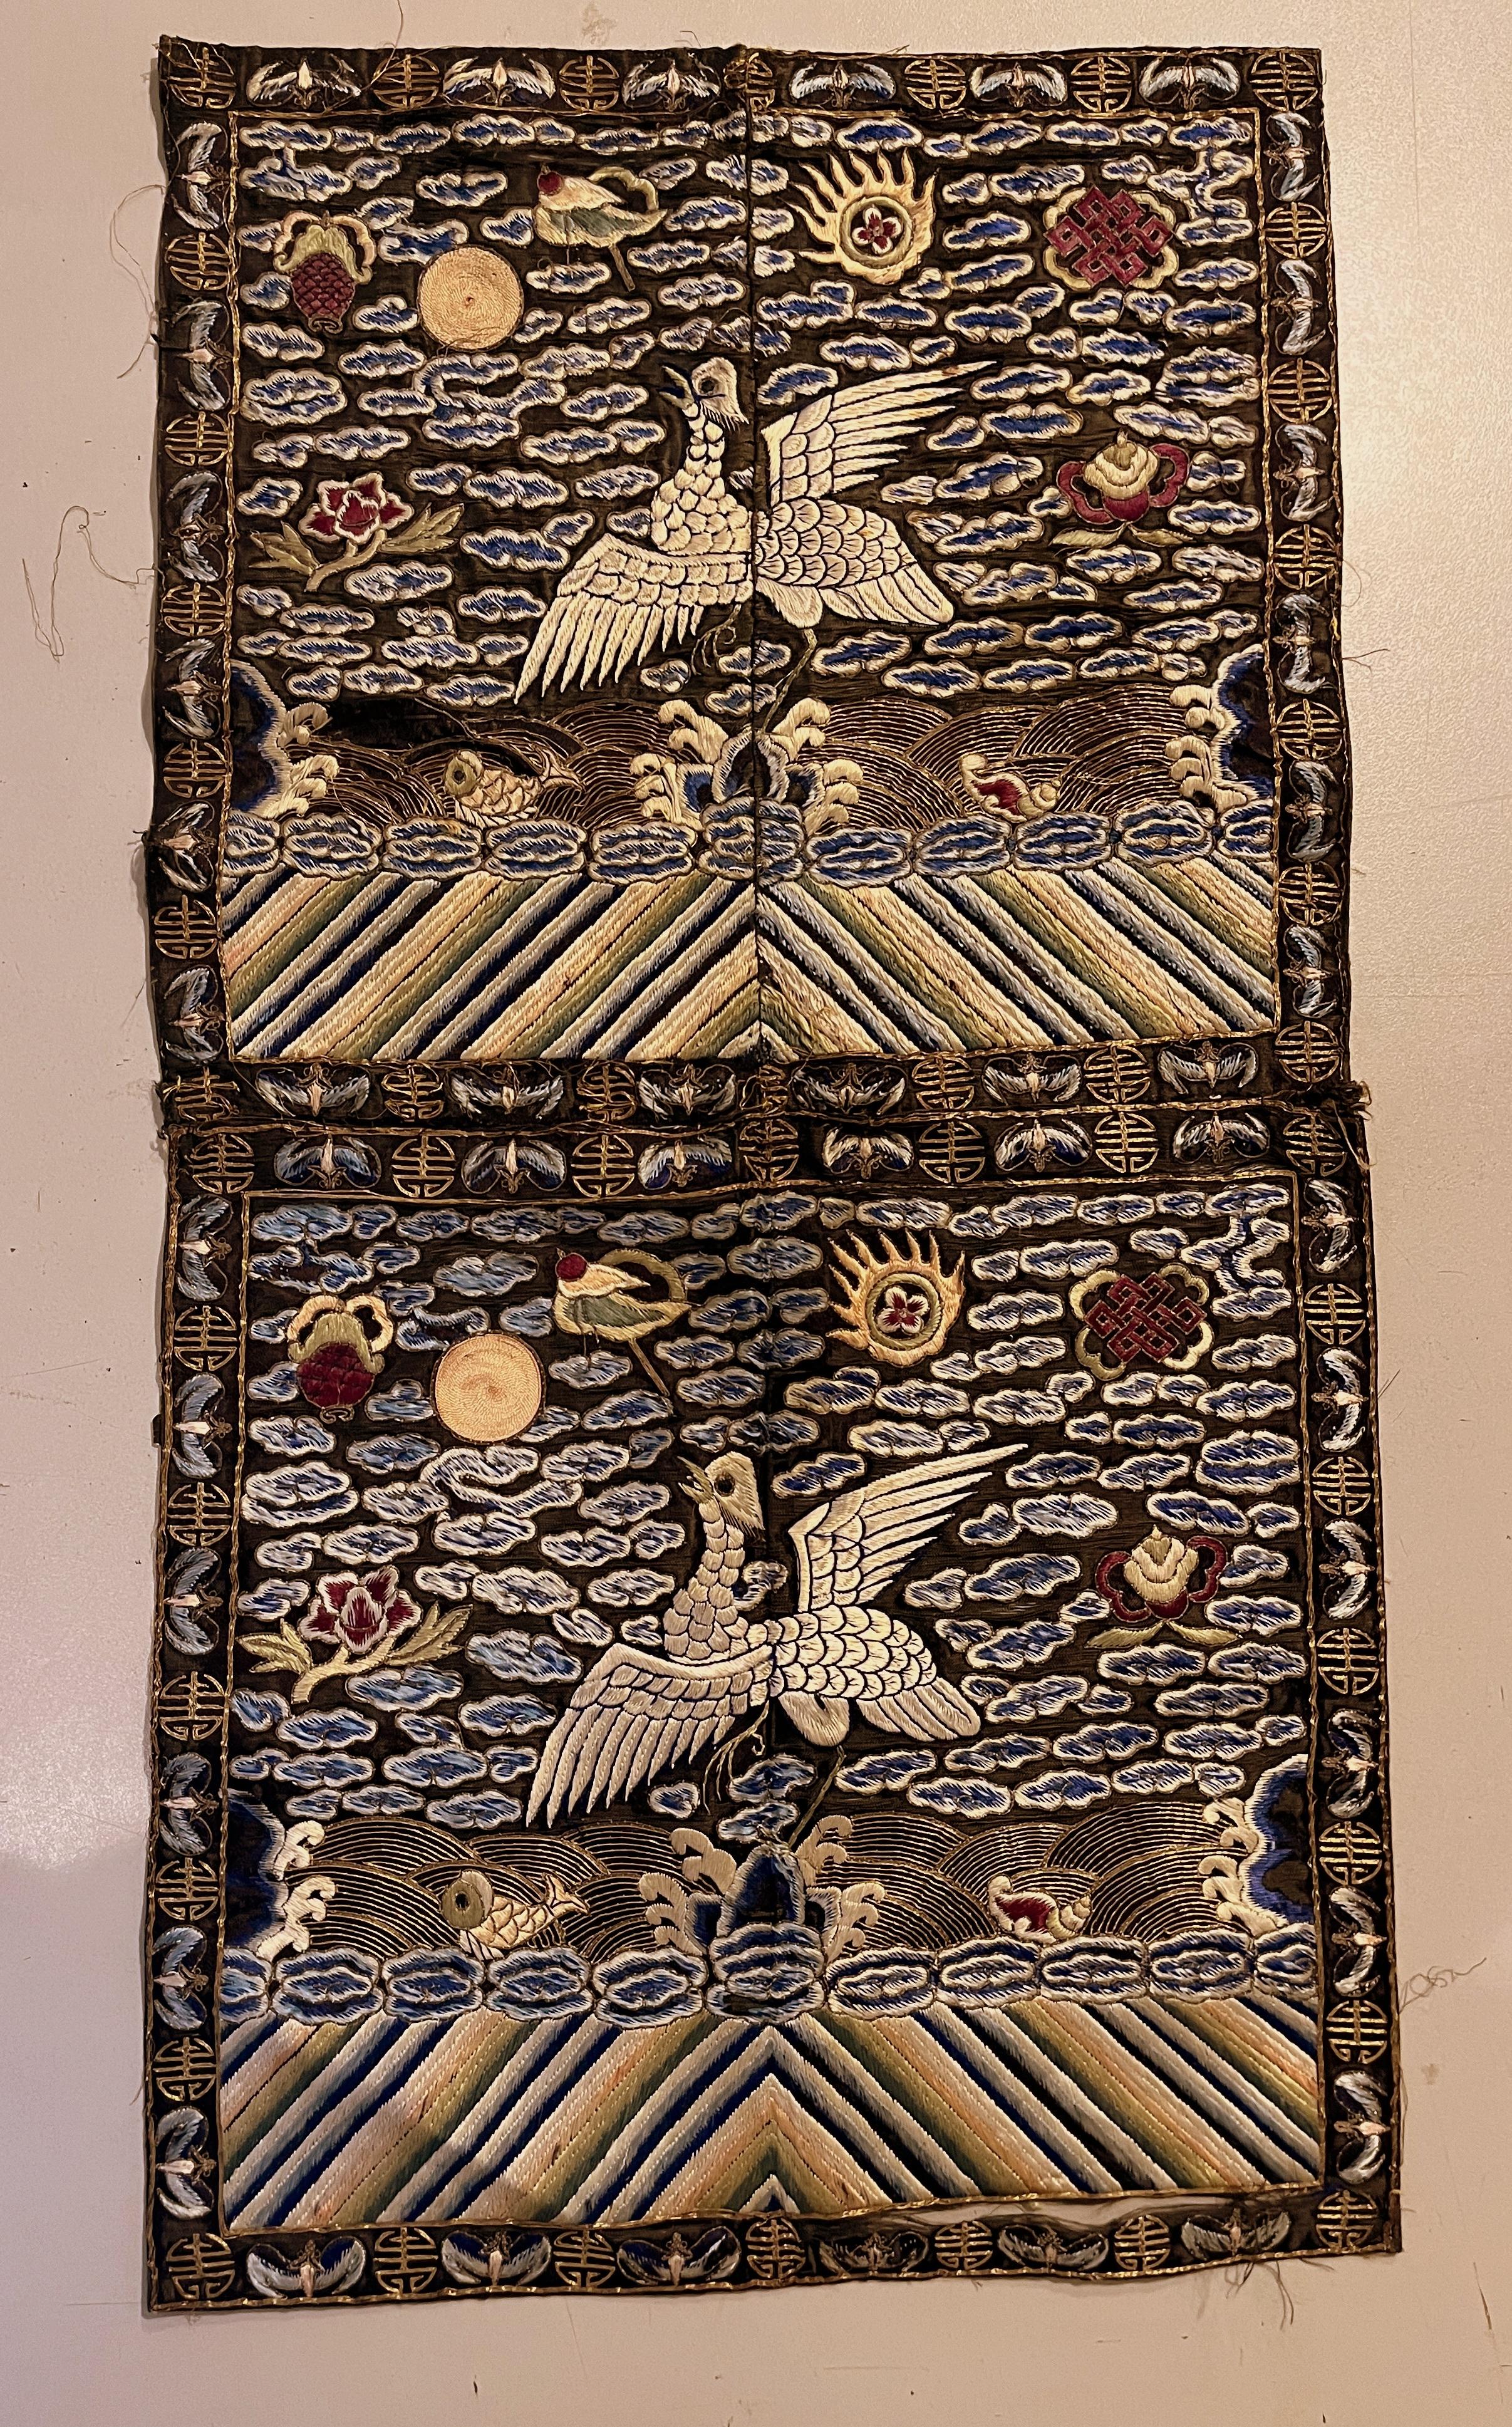 Pair of Qing Dynasty Embroidered Imperial civil officer rank badges with pheasant alighting astop a rock emerging from cloud and waves surrounding with auspicious symbols.
Each single badge is 12